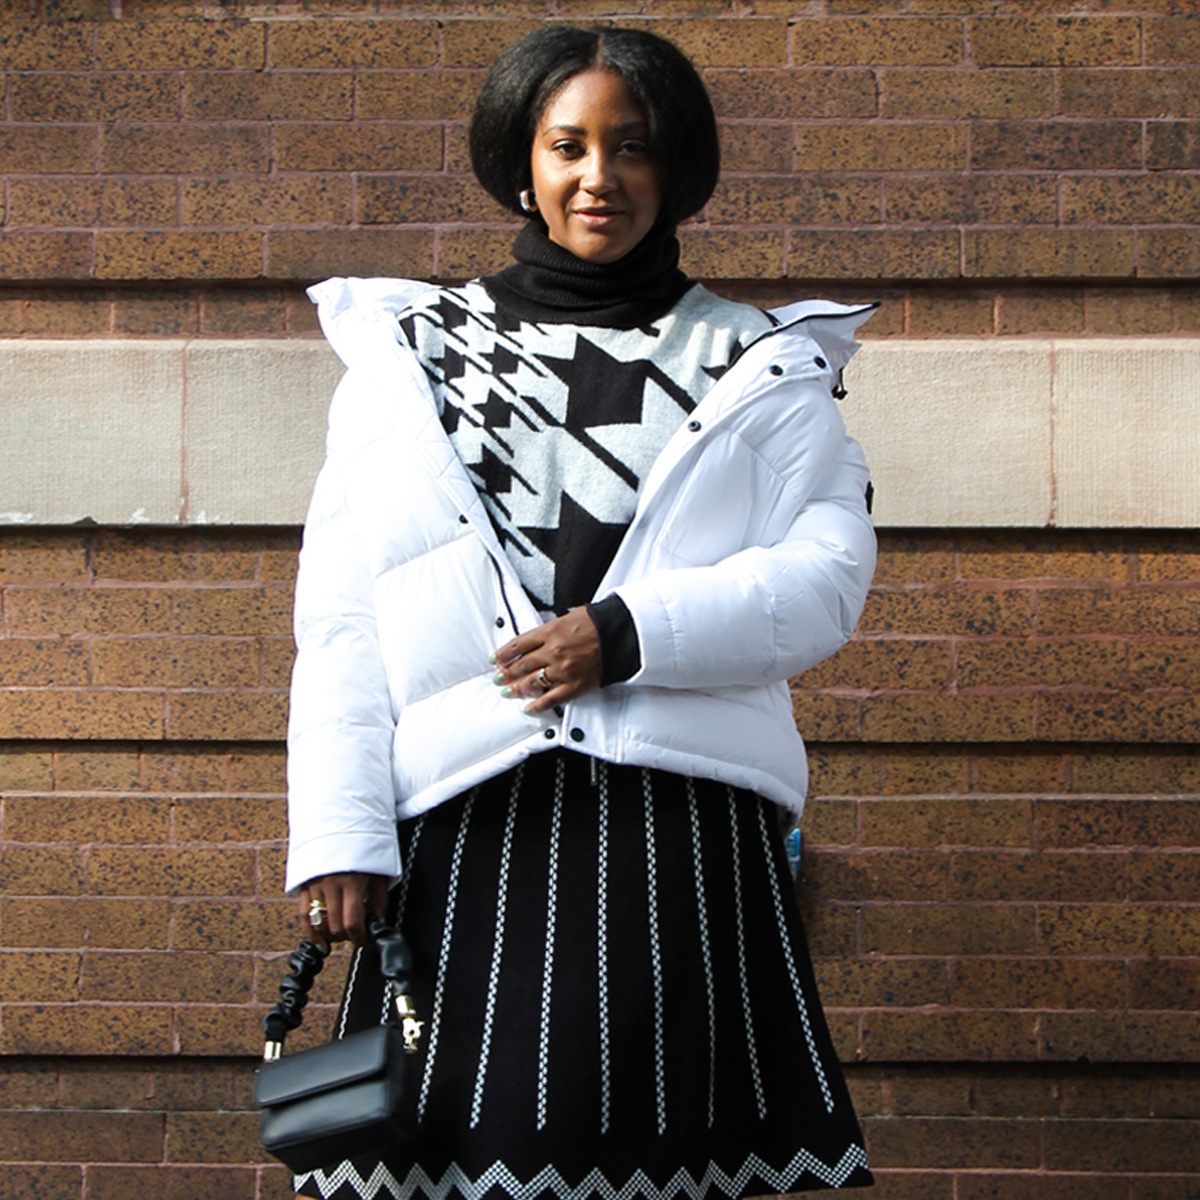 Celebrity Stylist Solange Franklin On the Power of Centering Yourself